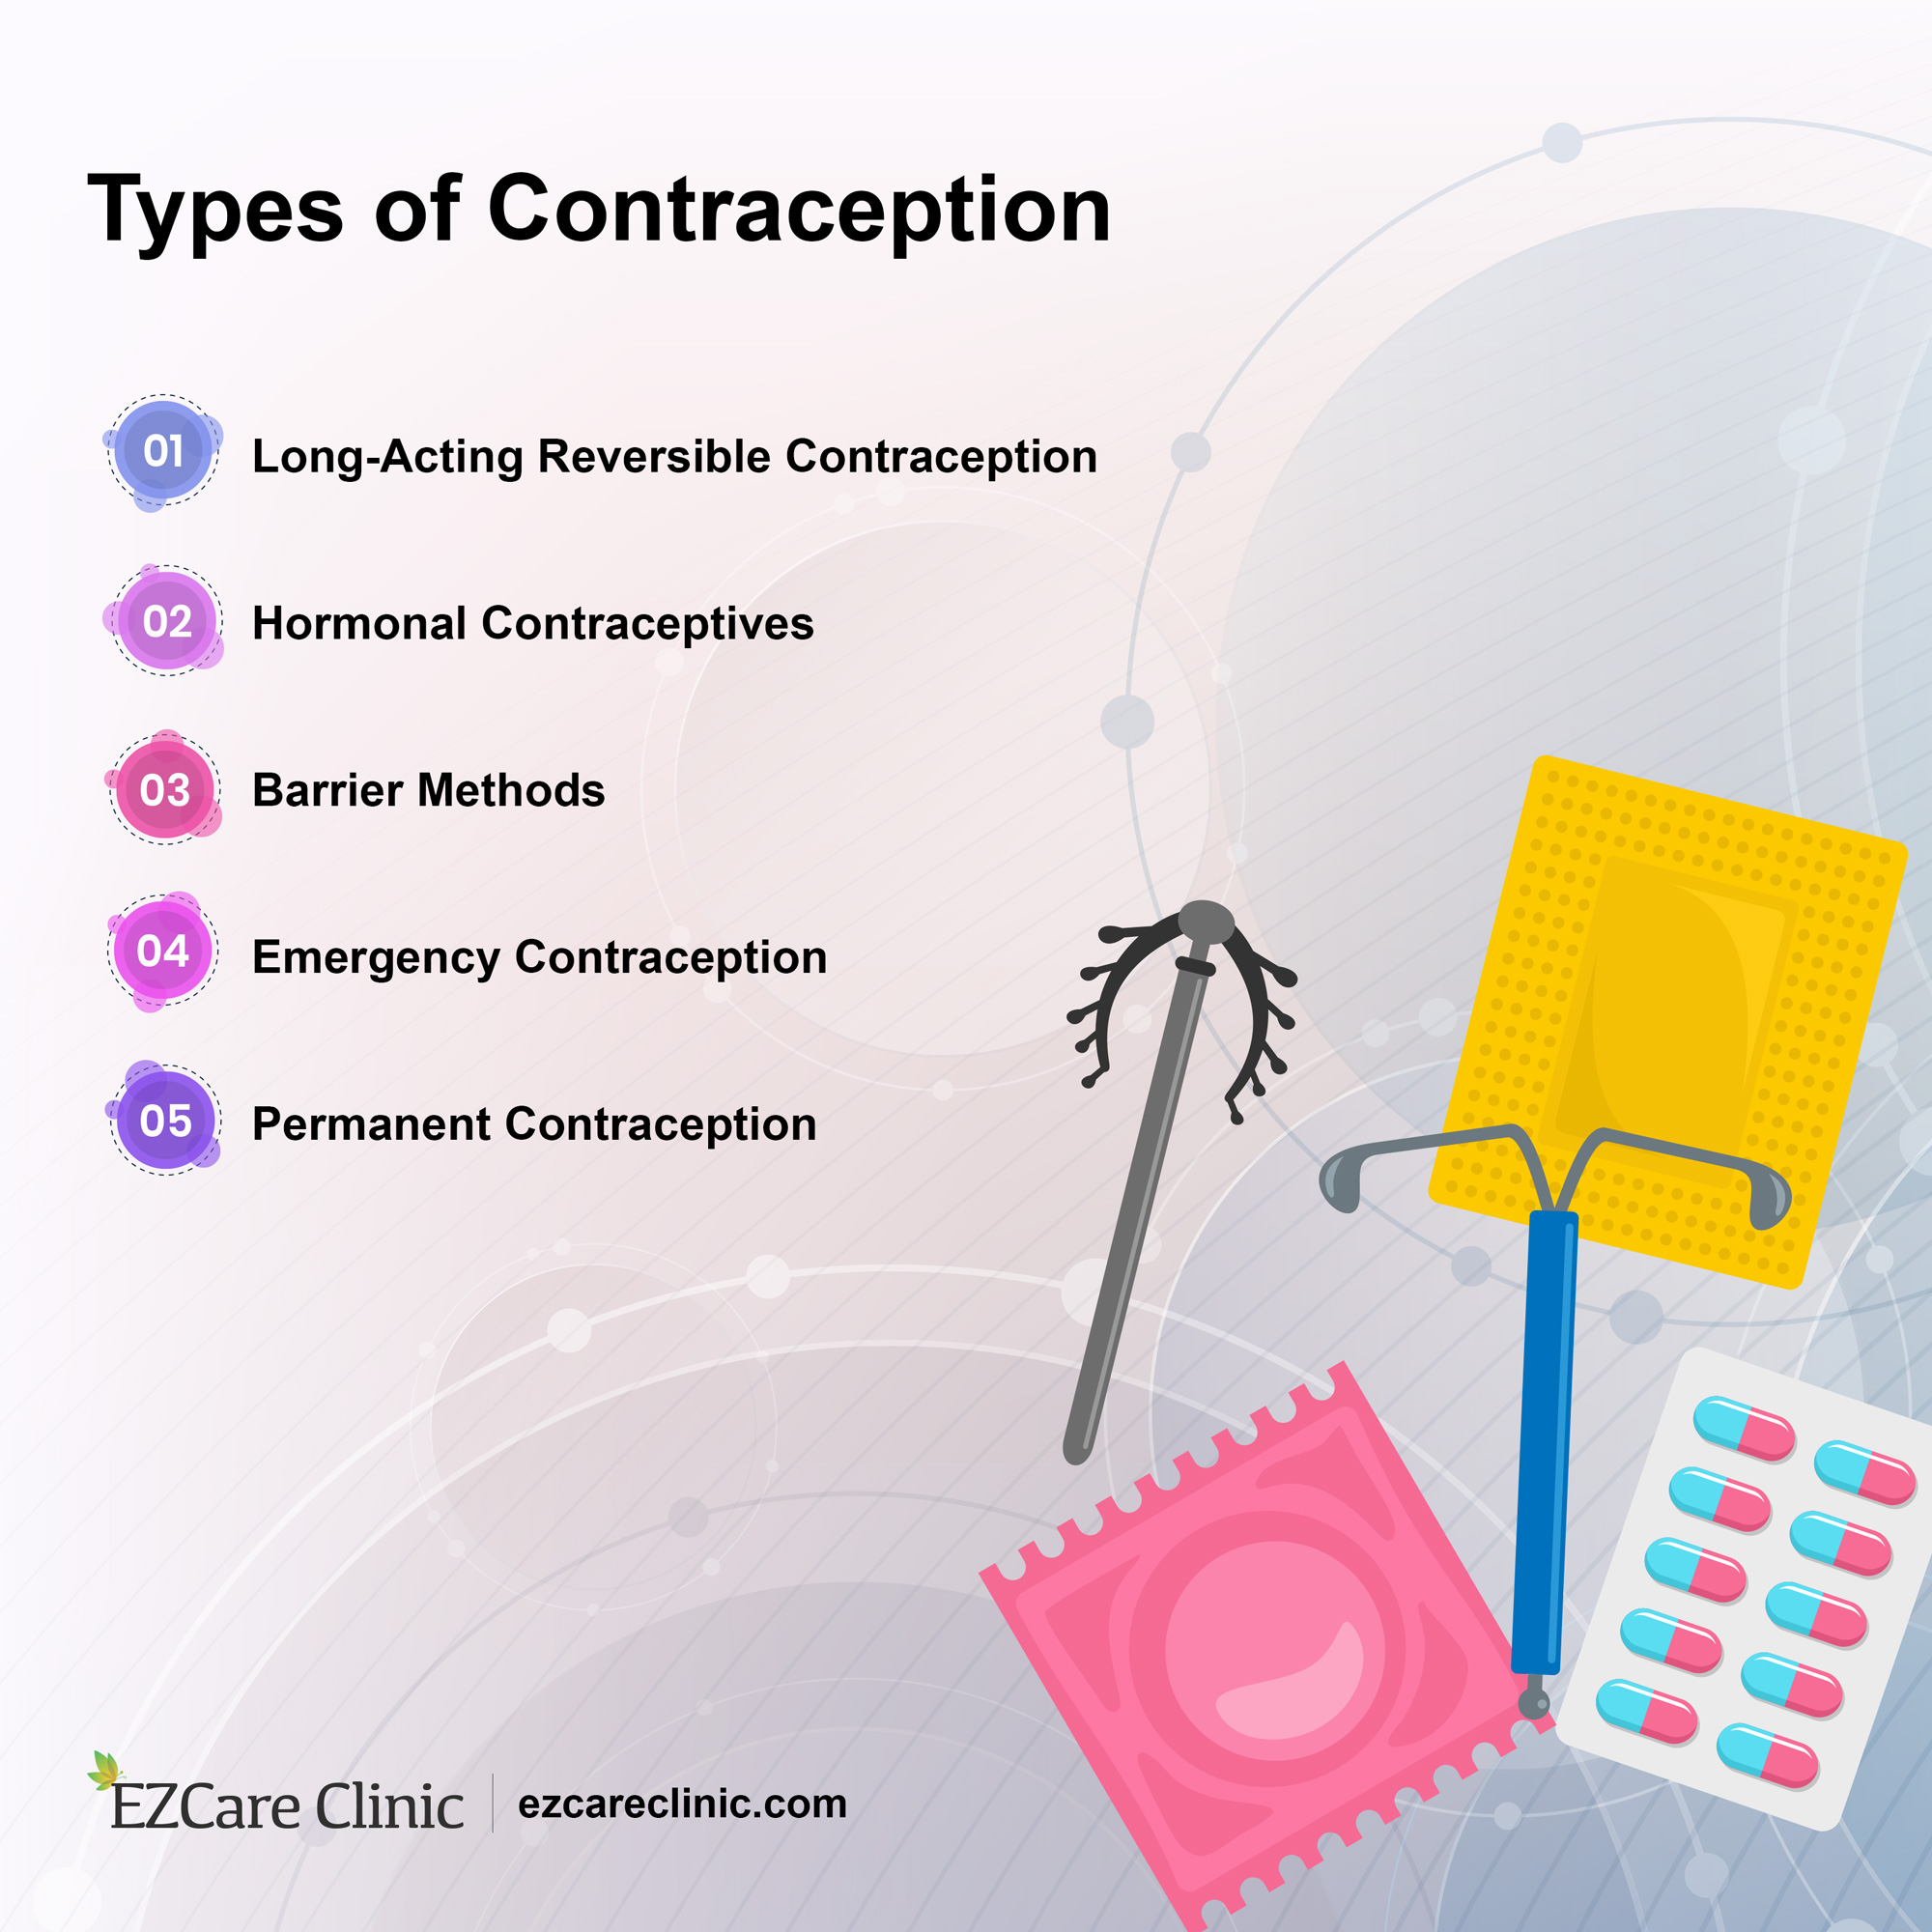 Birth Control and their type